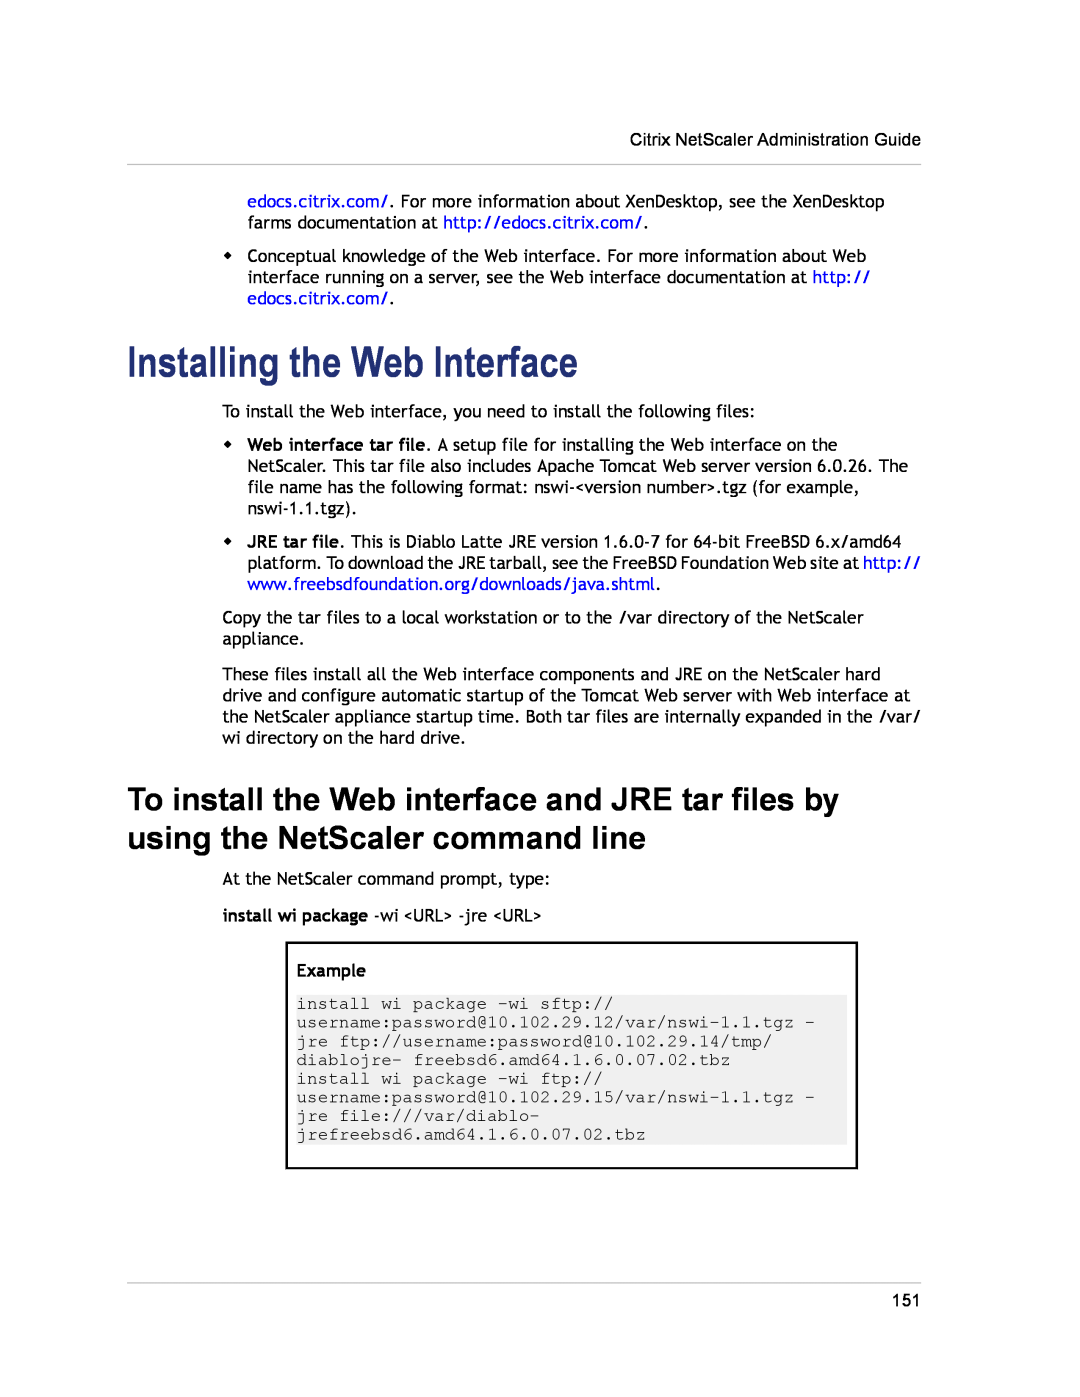 Citrix Systems CITRIX NETSCALER 9.3 manual Installing the Web Interface, Example 